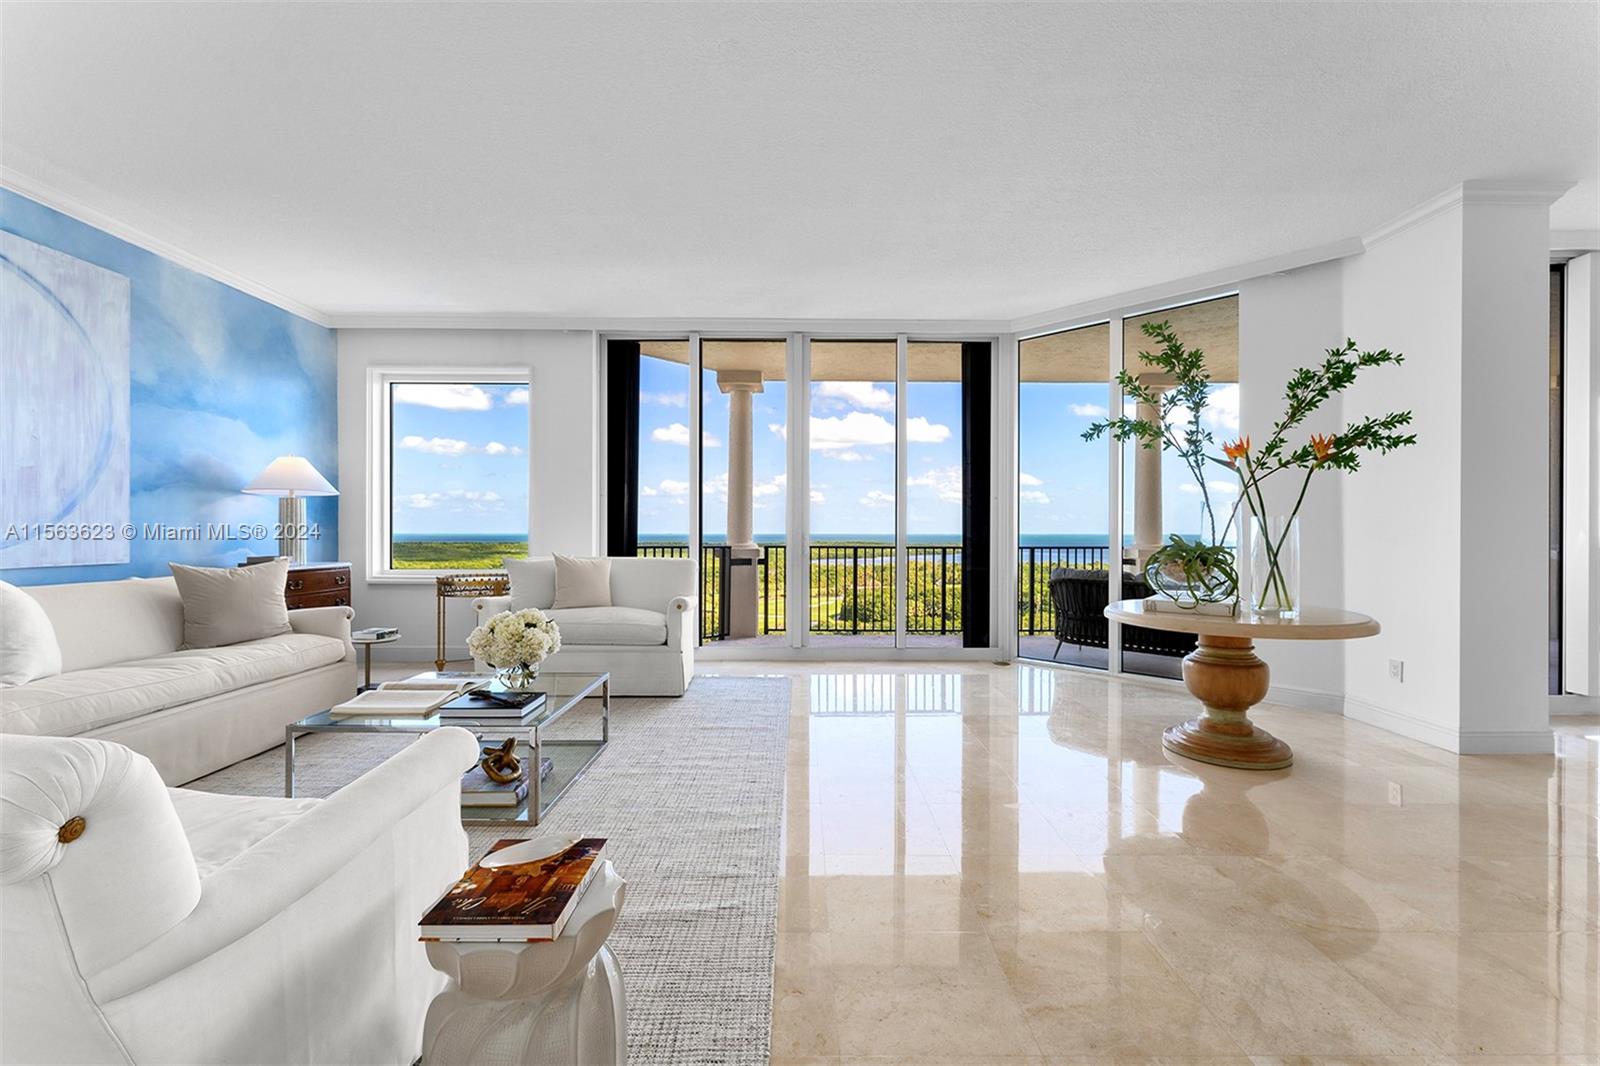 Luxury living awaits at the Verona building 12th floor Lower Penthouse, your private oasis in Deering Bay. This 4-bed, 4.5-bath condo offers 4,480 sq ft of spacious living. Enjoy breathtaking Biscayne Bay views and the Deering Bay community from the moment you step inside. Open floor plan and high ceilings create a grand feel. Relax in the main suite, entertain in the expansive living areas, or work from the dedicated office. Other features include custom kitchen with top-of-the-line appliances, wet bar, hand painted murals on living room wall and dining/kitchen ceilings, private enclosed garage with AC and storage, golf cart parking space and private elevator. Unwind on the 1,000+ sq ft of terraces and soak up the South Florida sunshine. Club membership and Boat slips available.